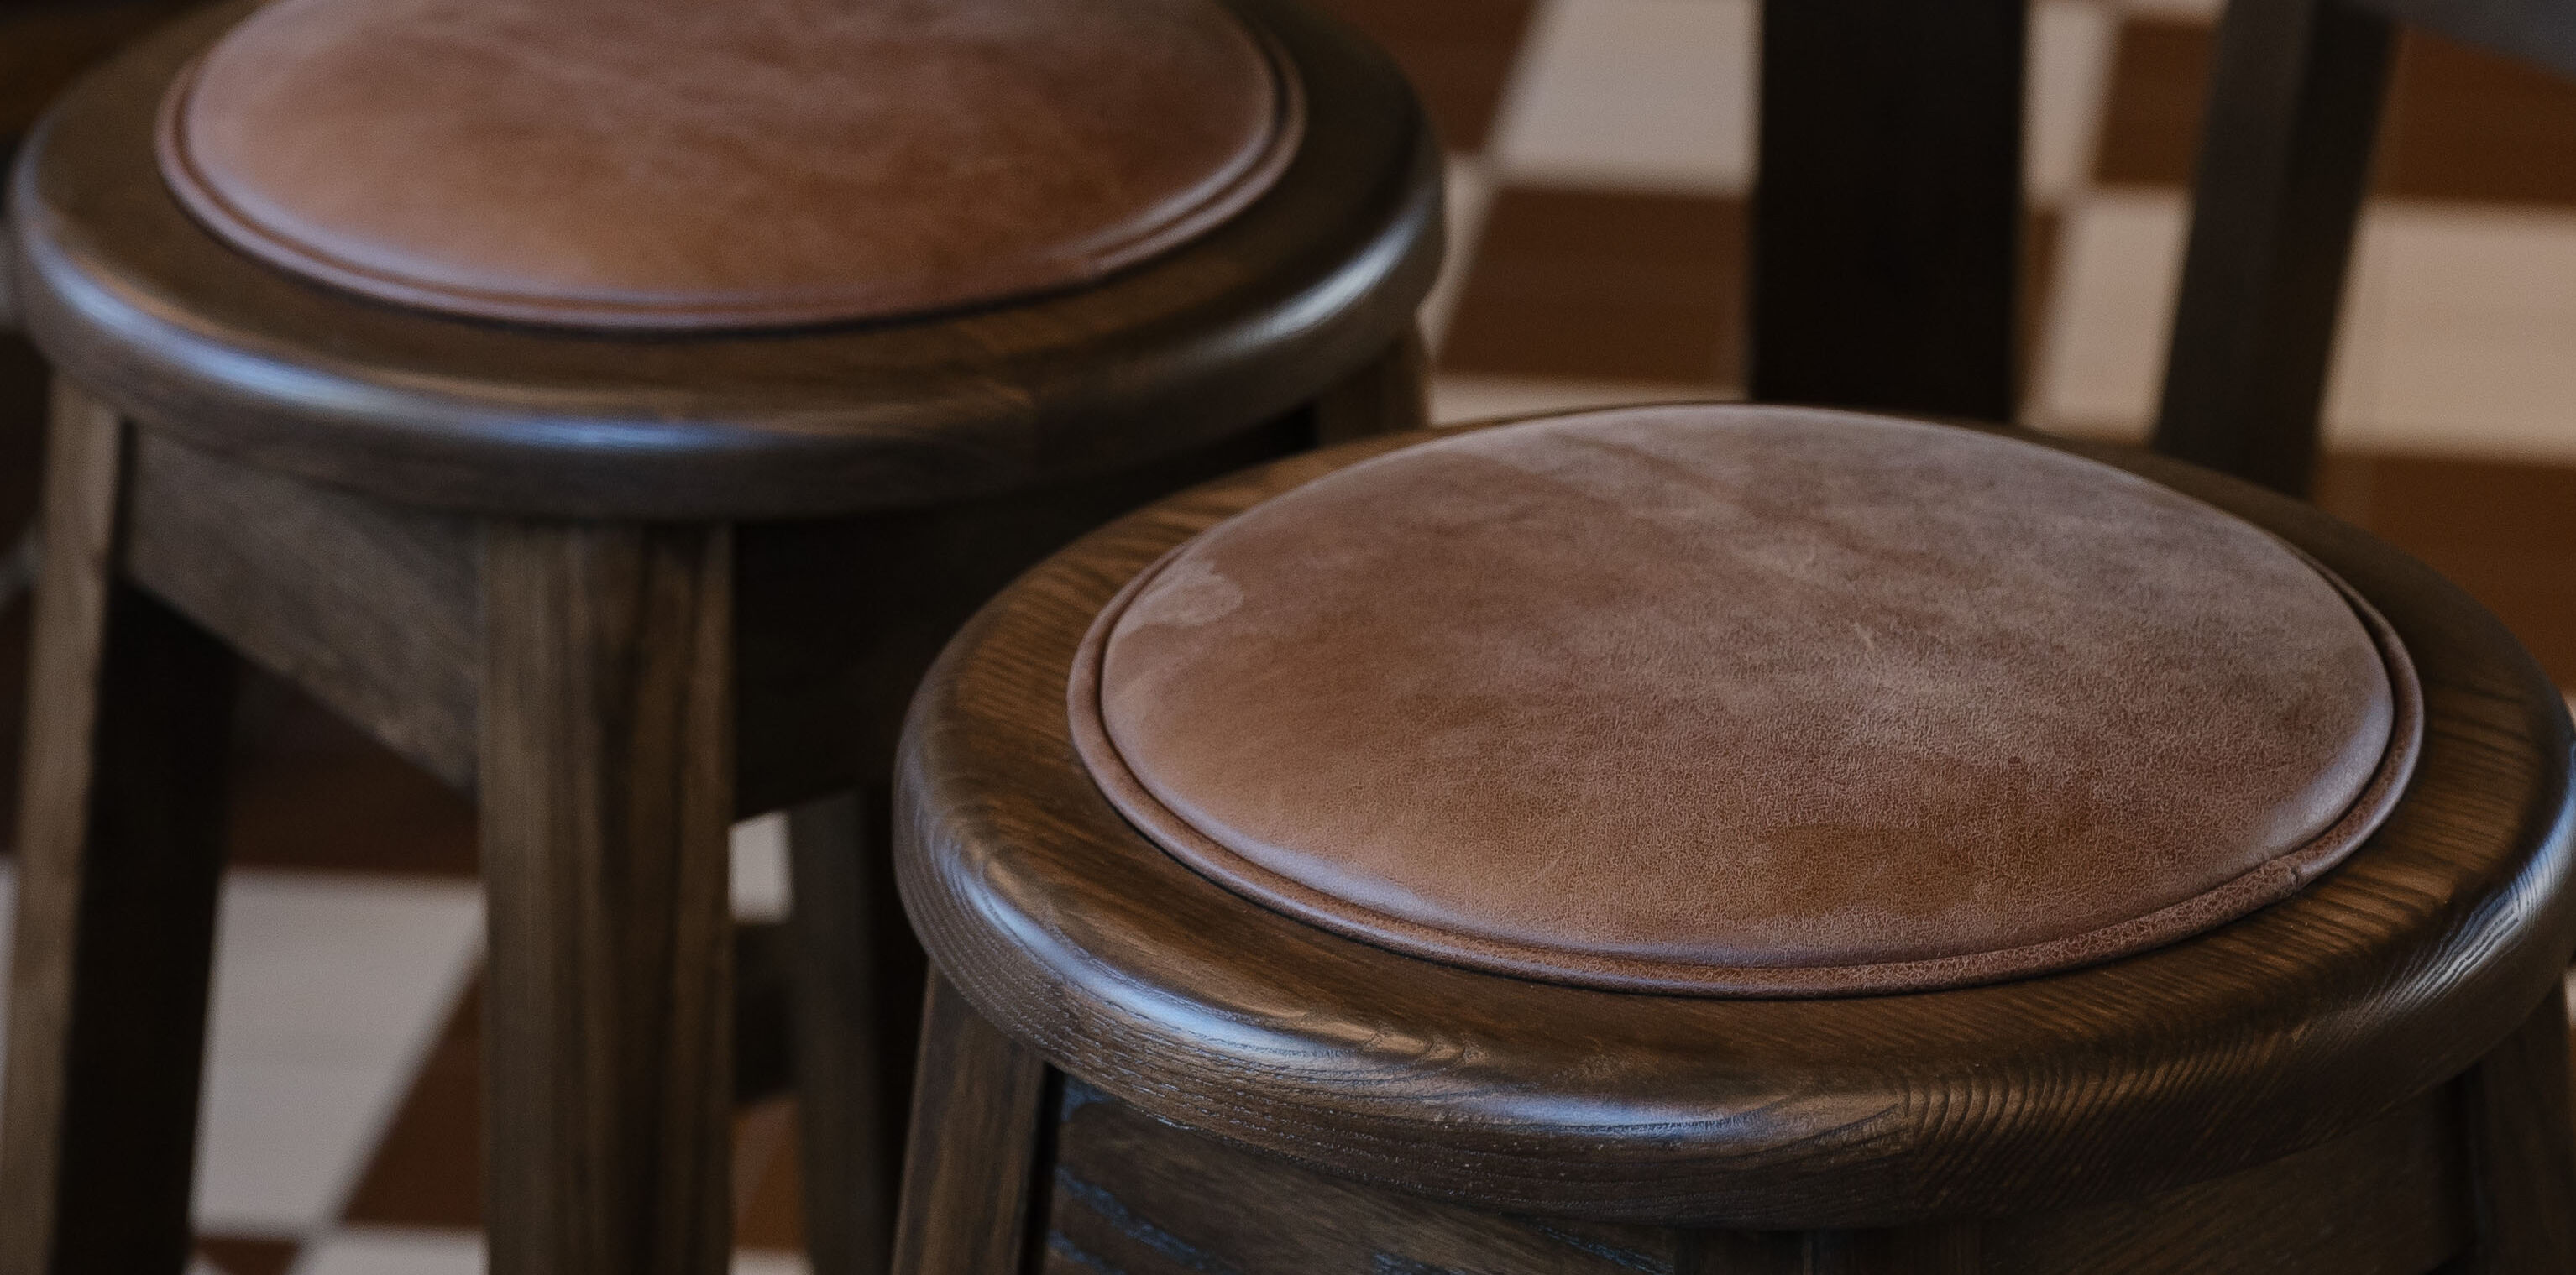 Upholstered Colorado Round Stools at Hotel Ponsonby 